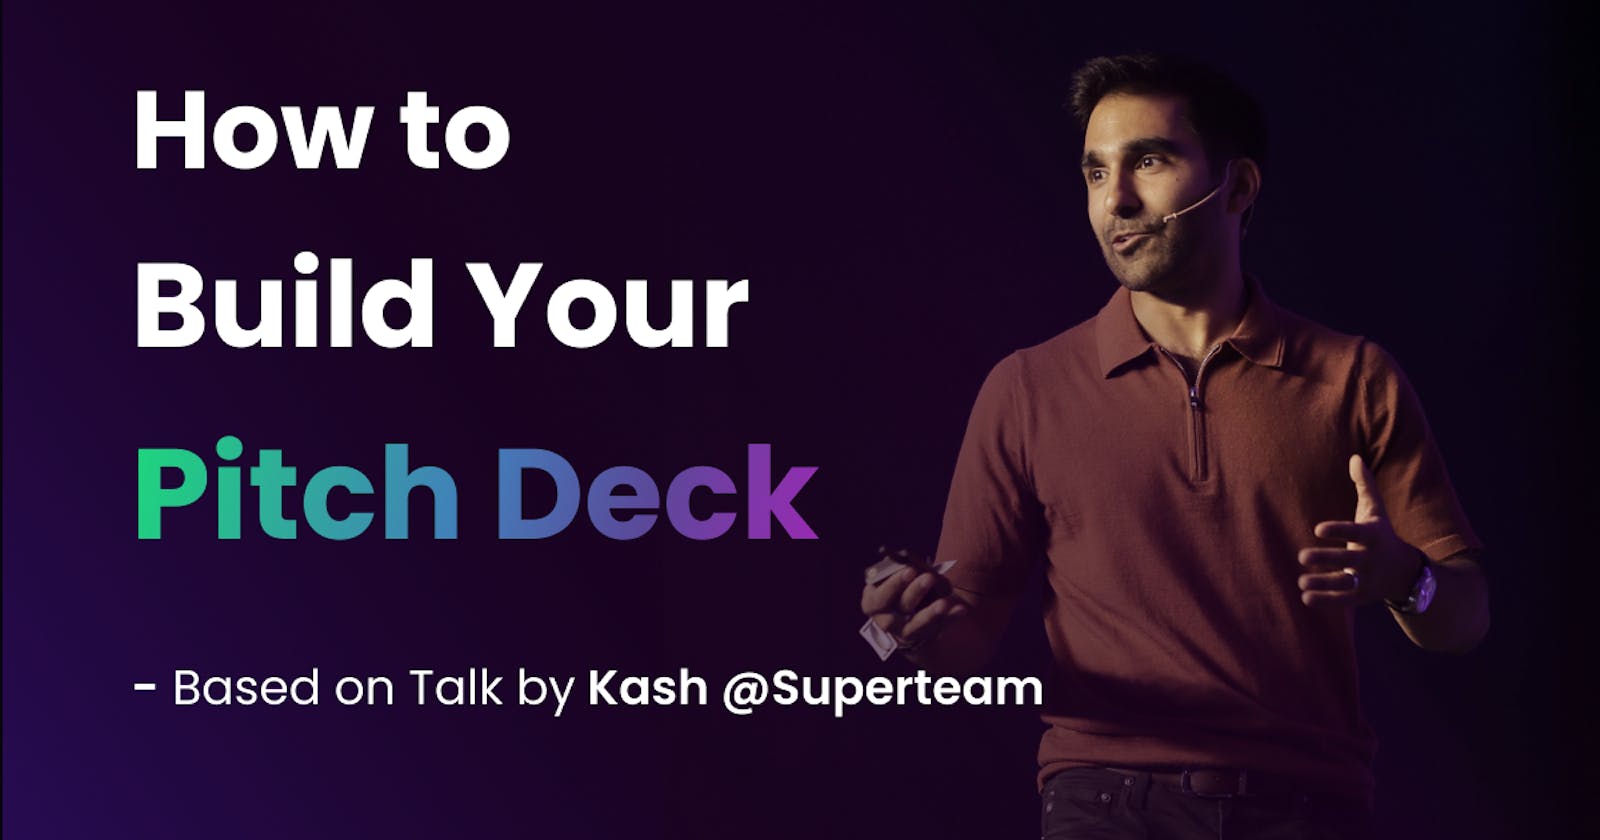 Building your Pitch Deck